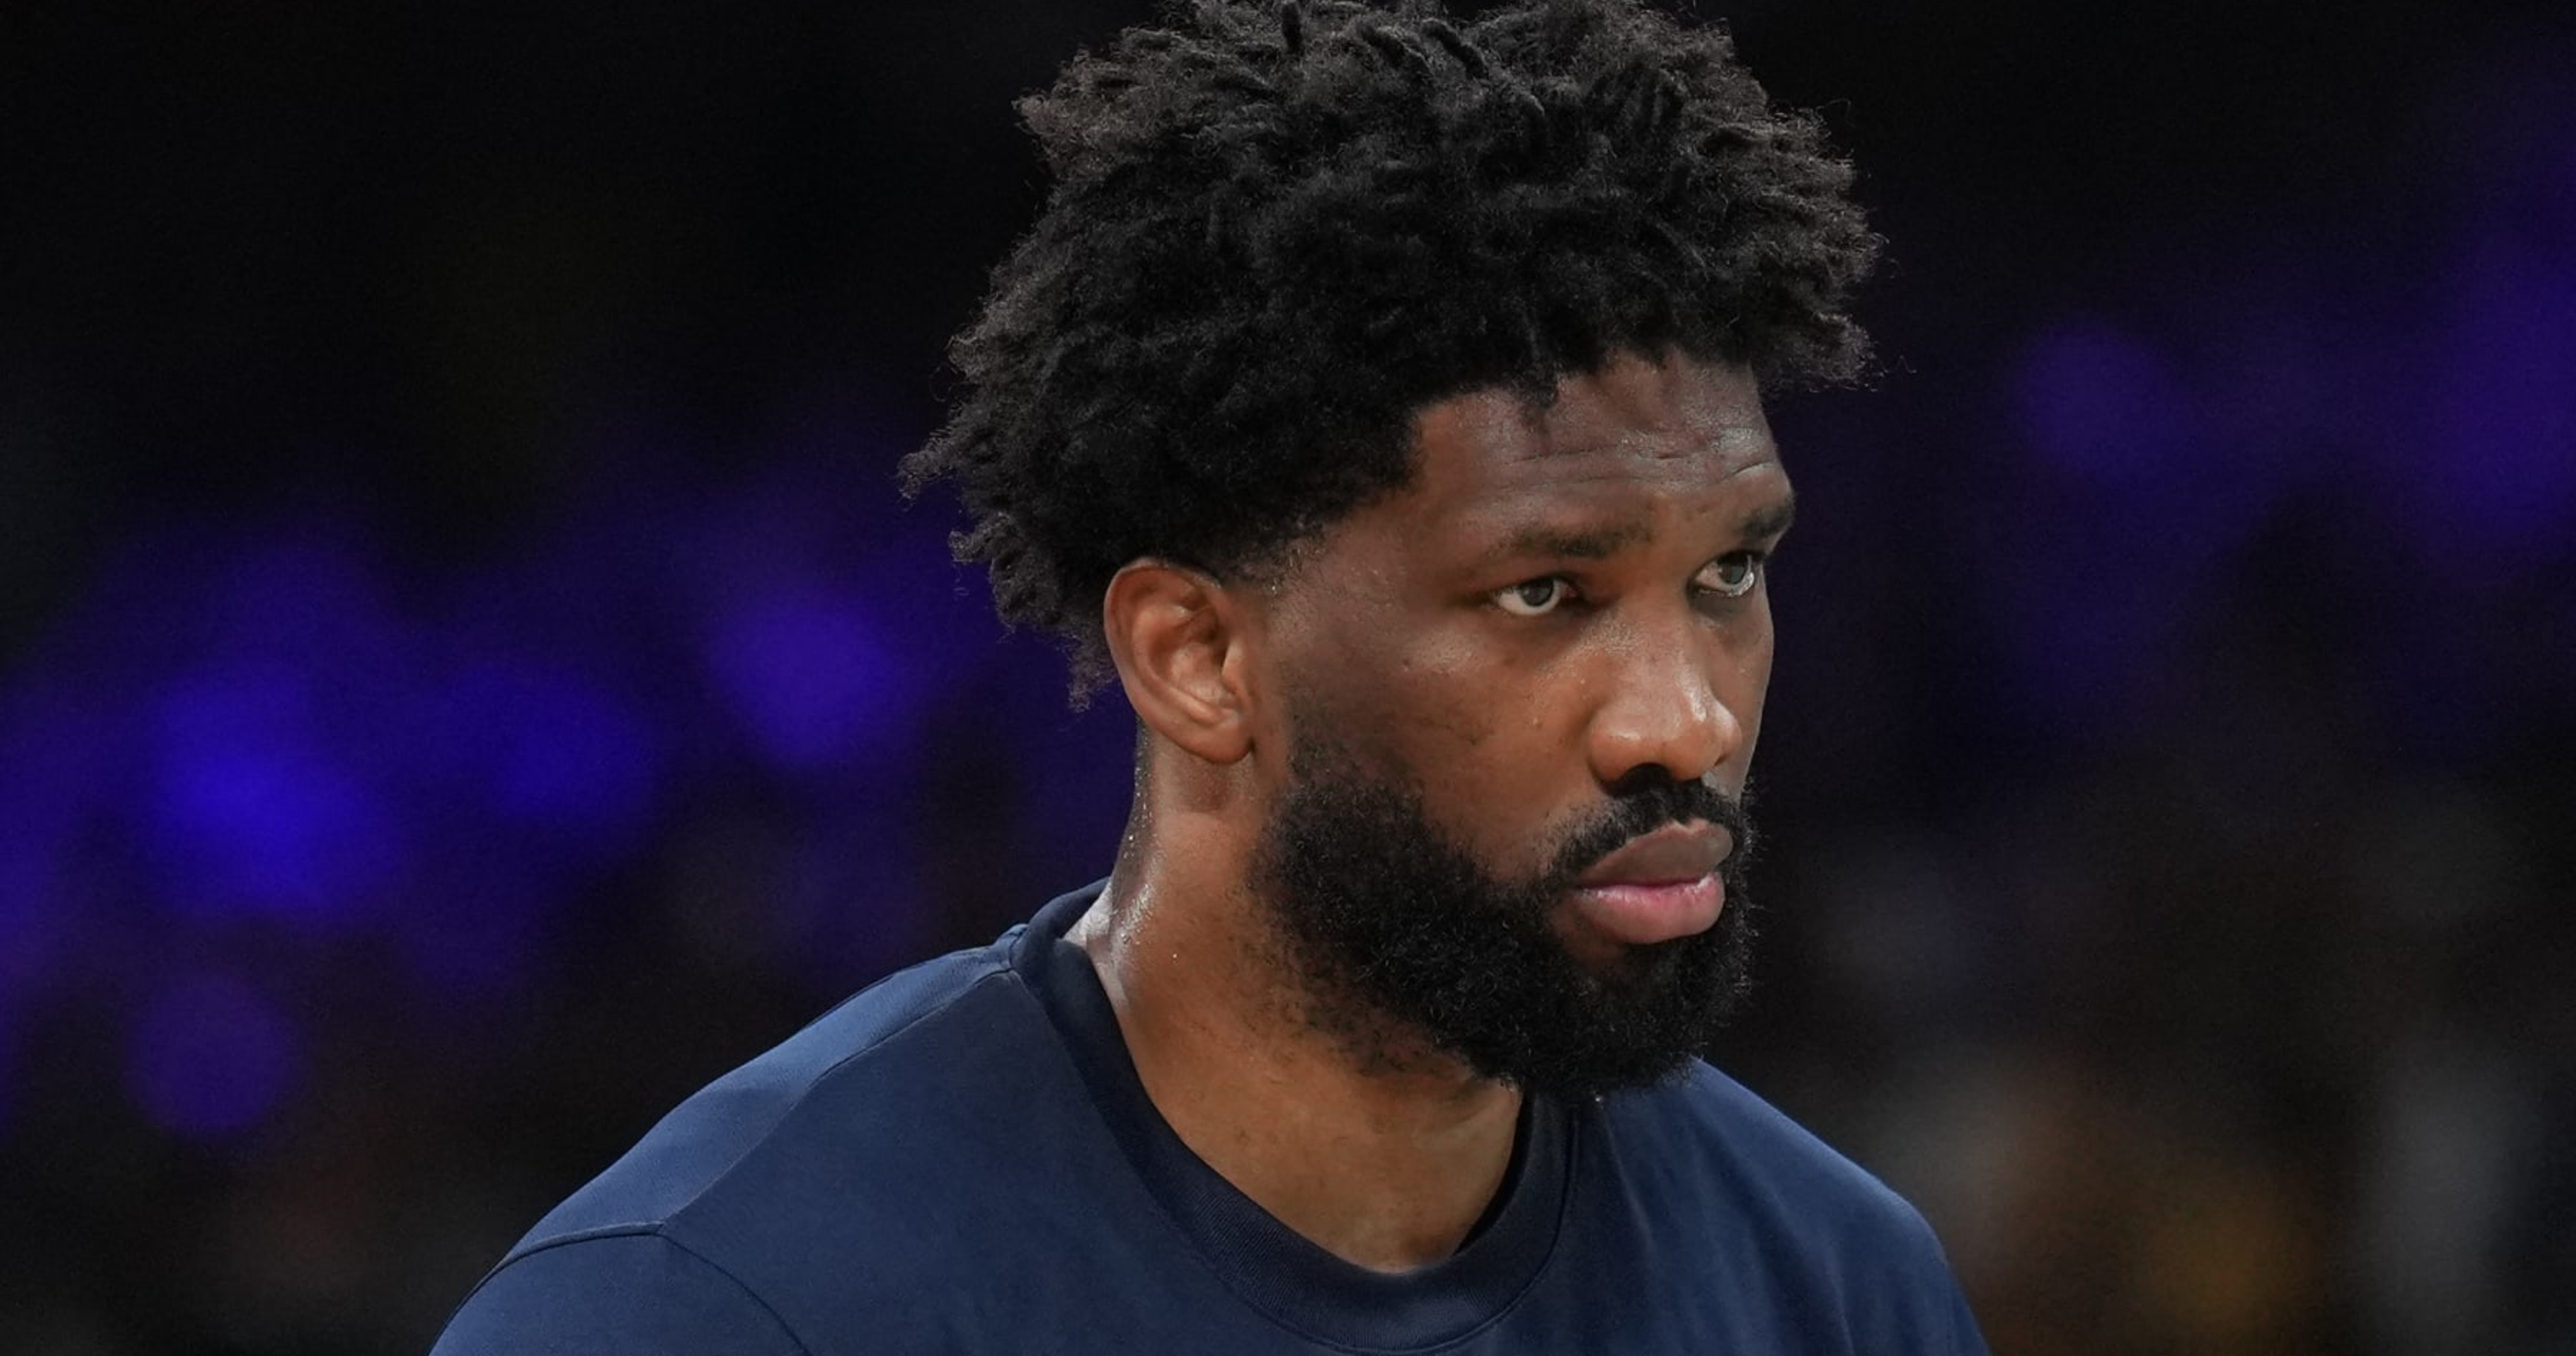 USA's Steve Kerr Says Joel Embiid Benching Due to Matchup; Center to Start Next Game